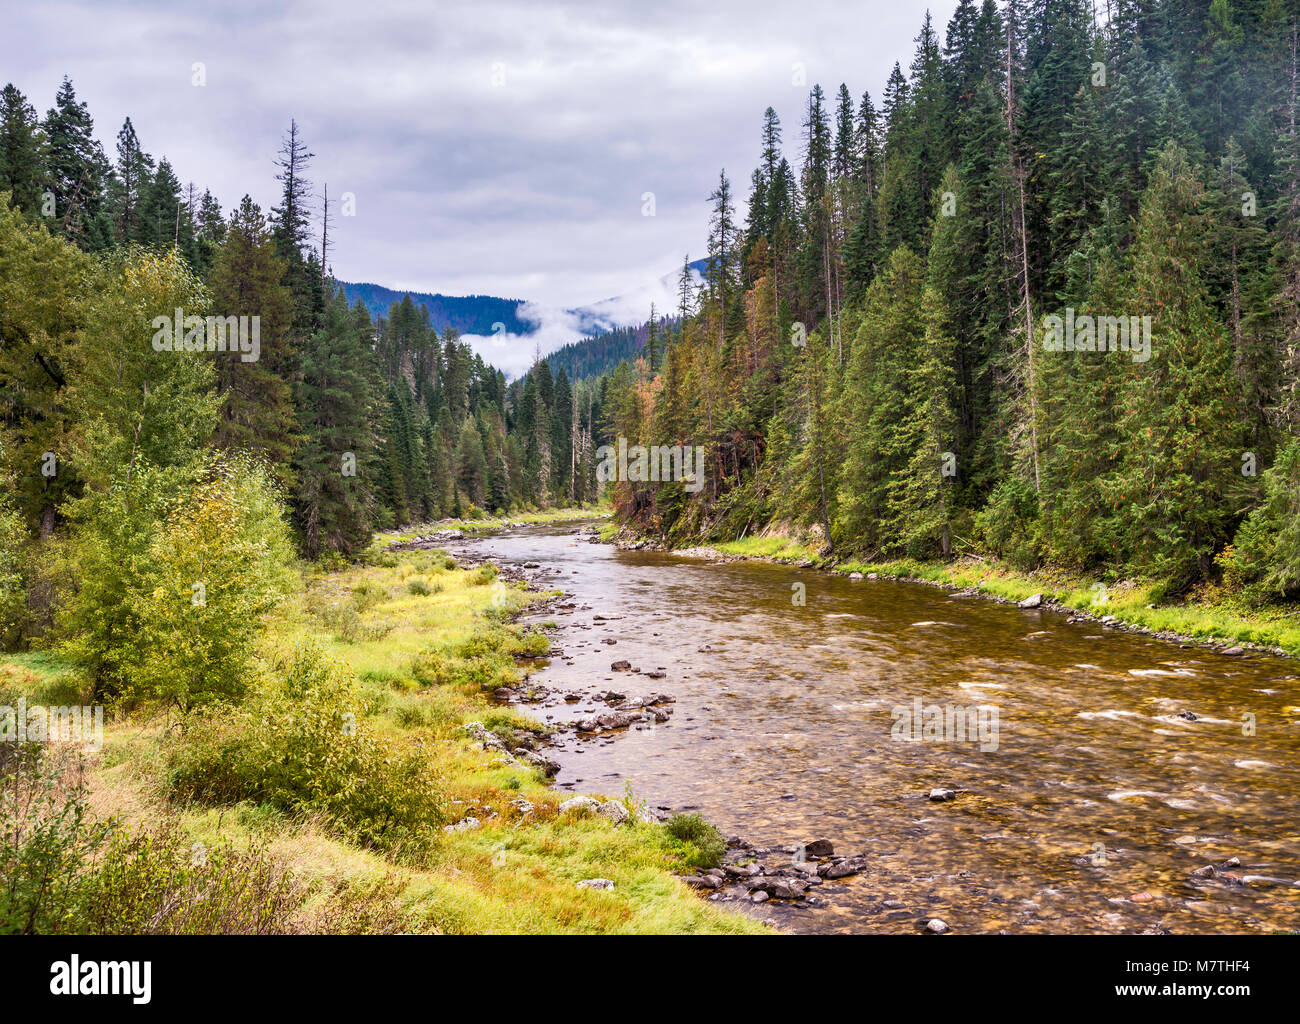 Lochsa River, Clearwater Mountains, Lochsa Wild and Scenic River Corridor, Northwest Passage Scenic Byway, Clearwater National Forest, Idaho, USA Stock Photo